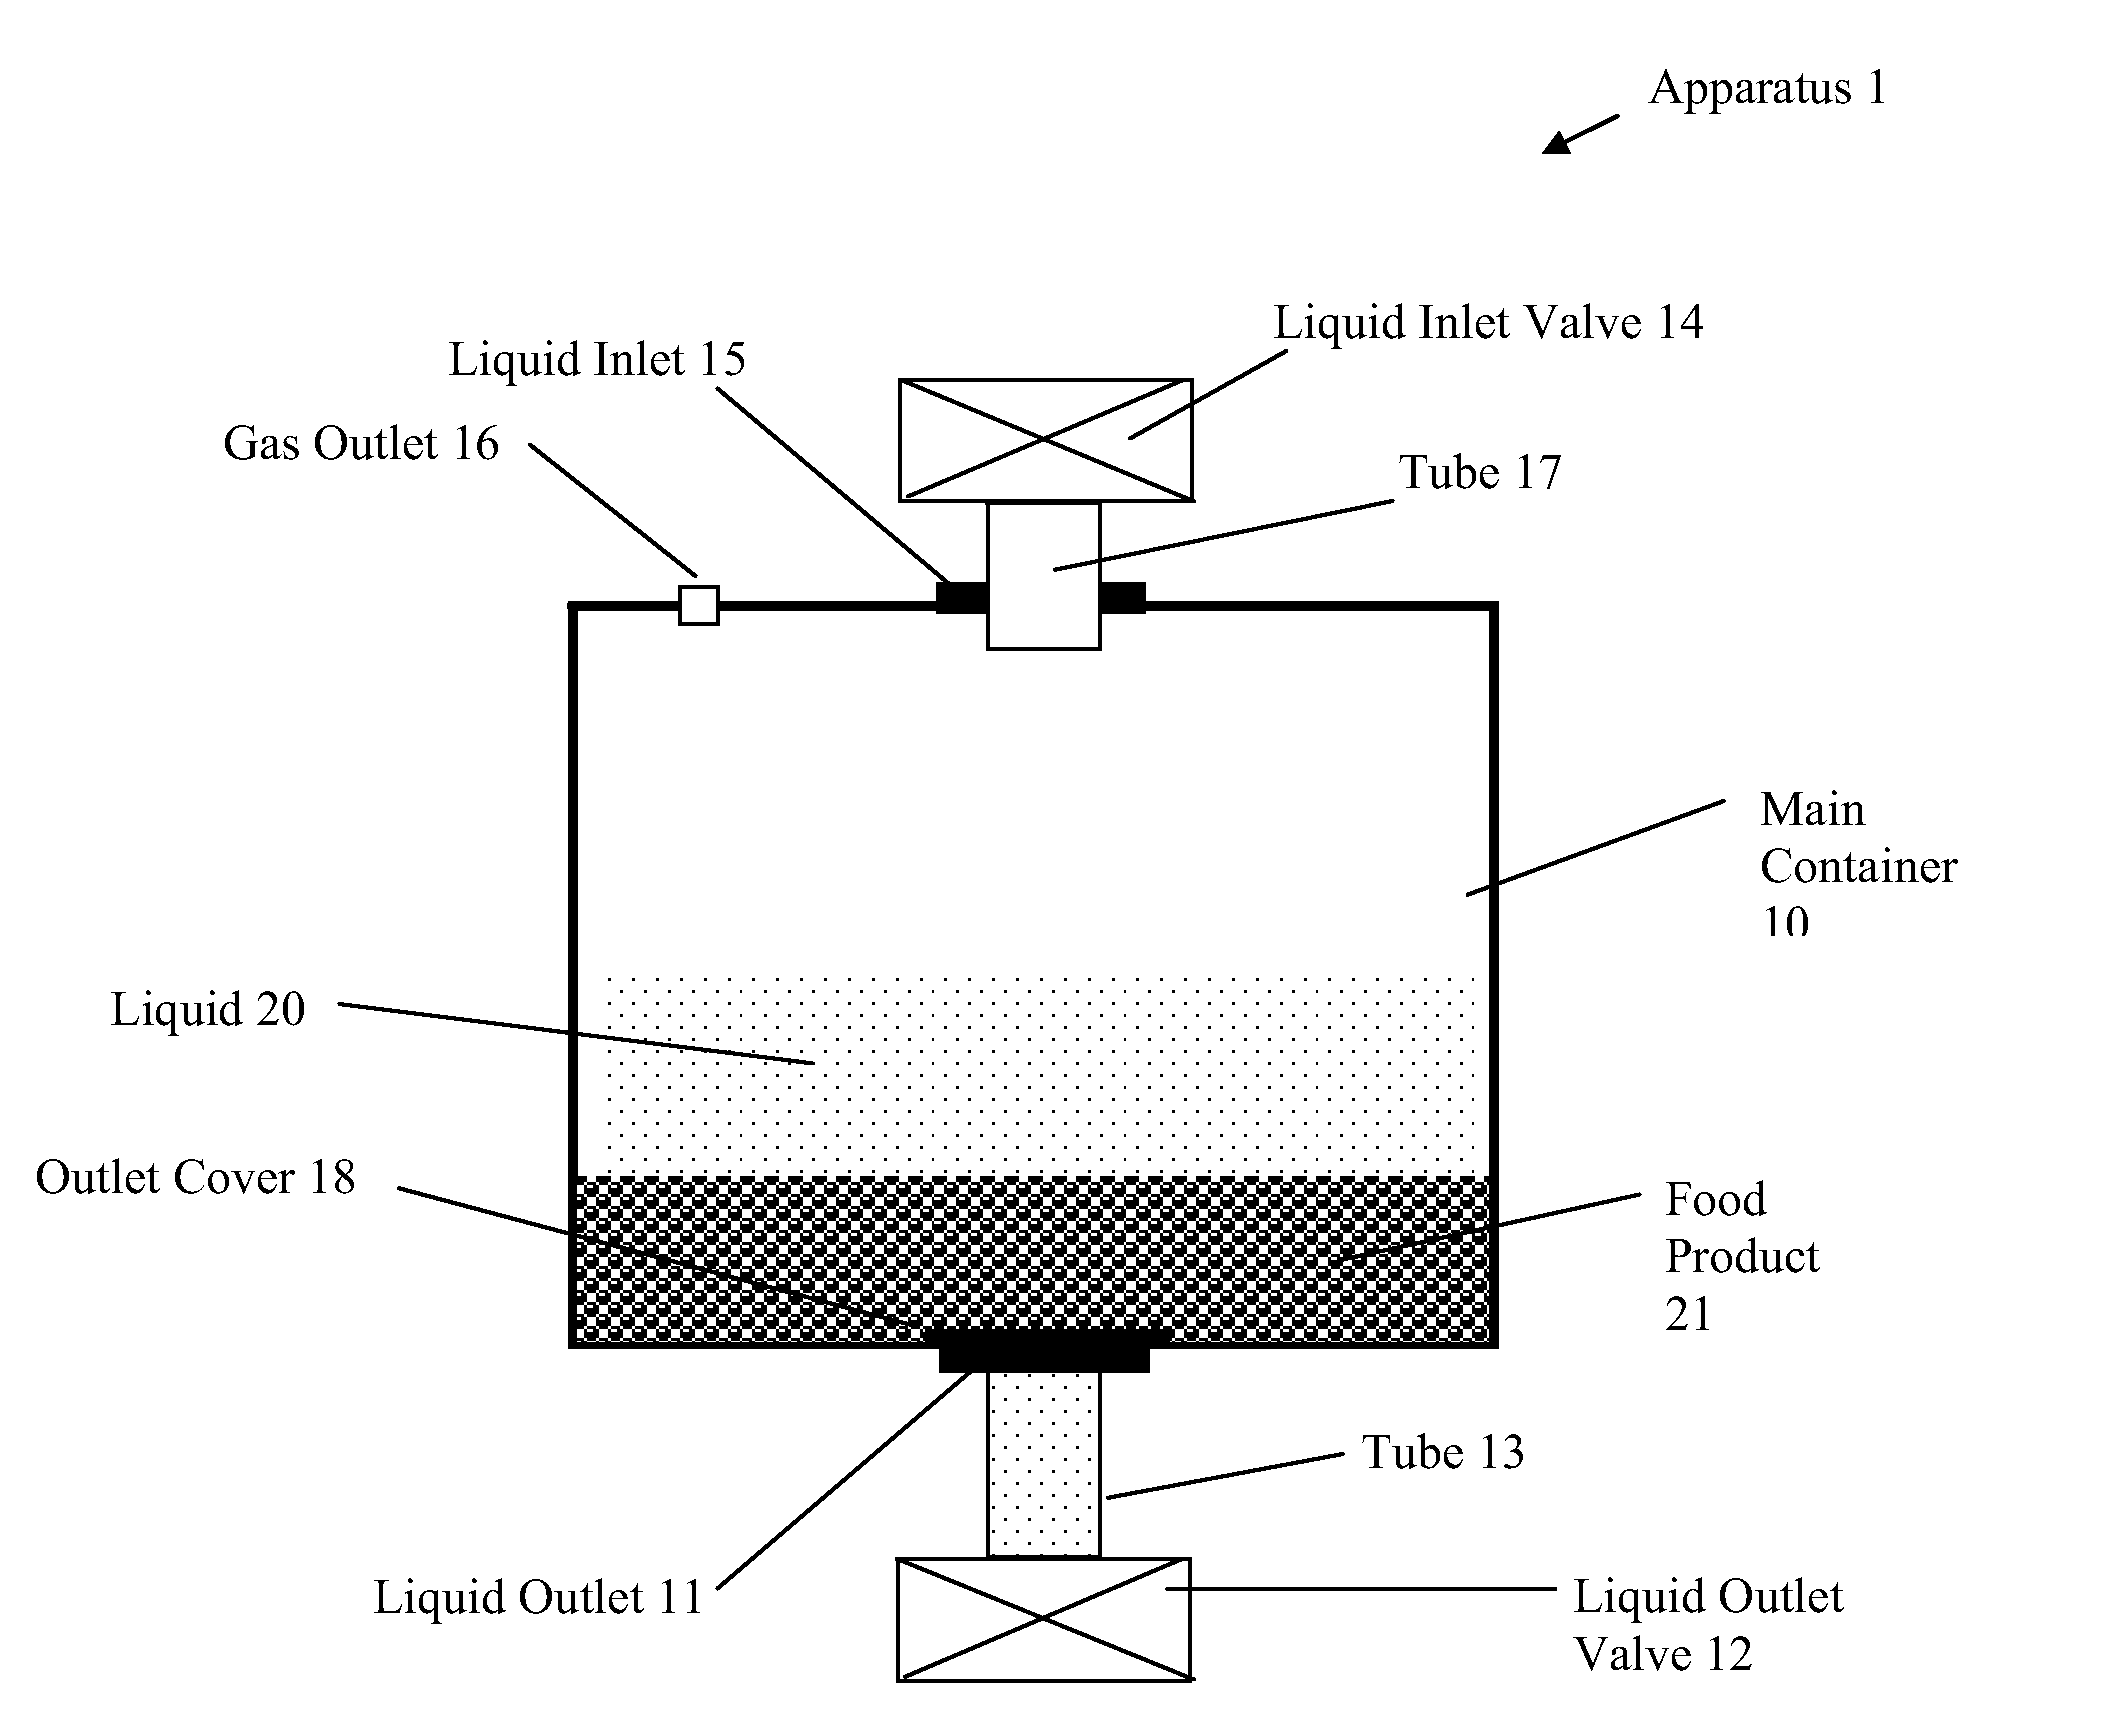 Liquid movement and control within a container for food preparation